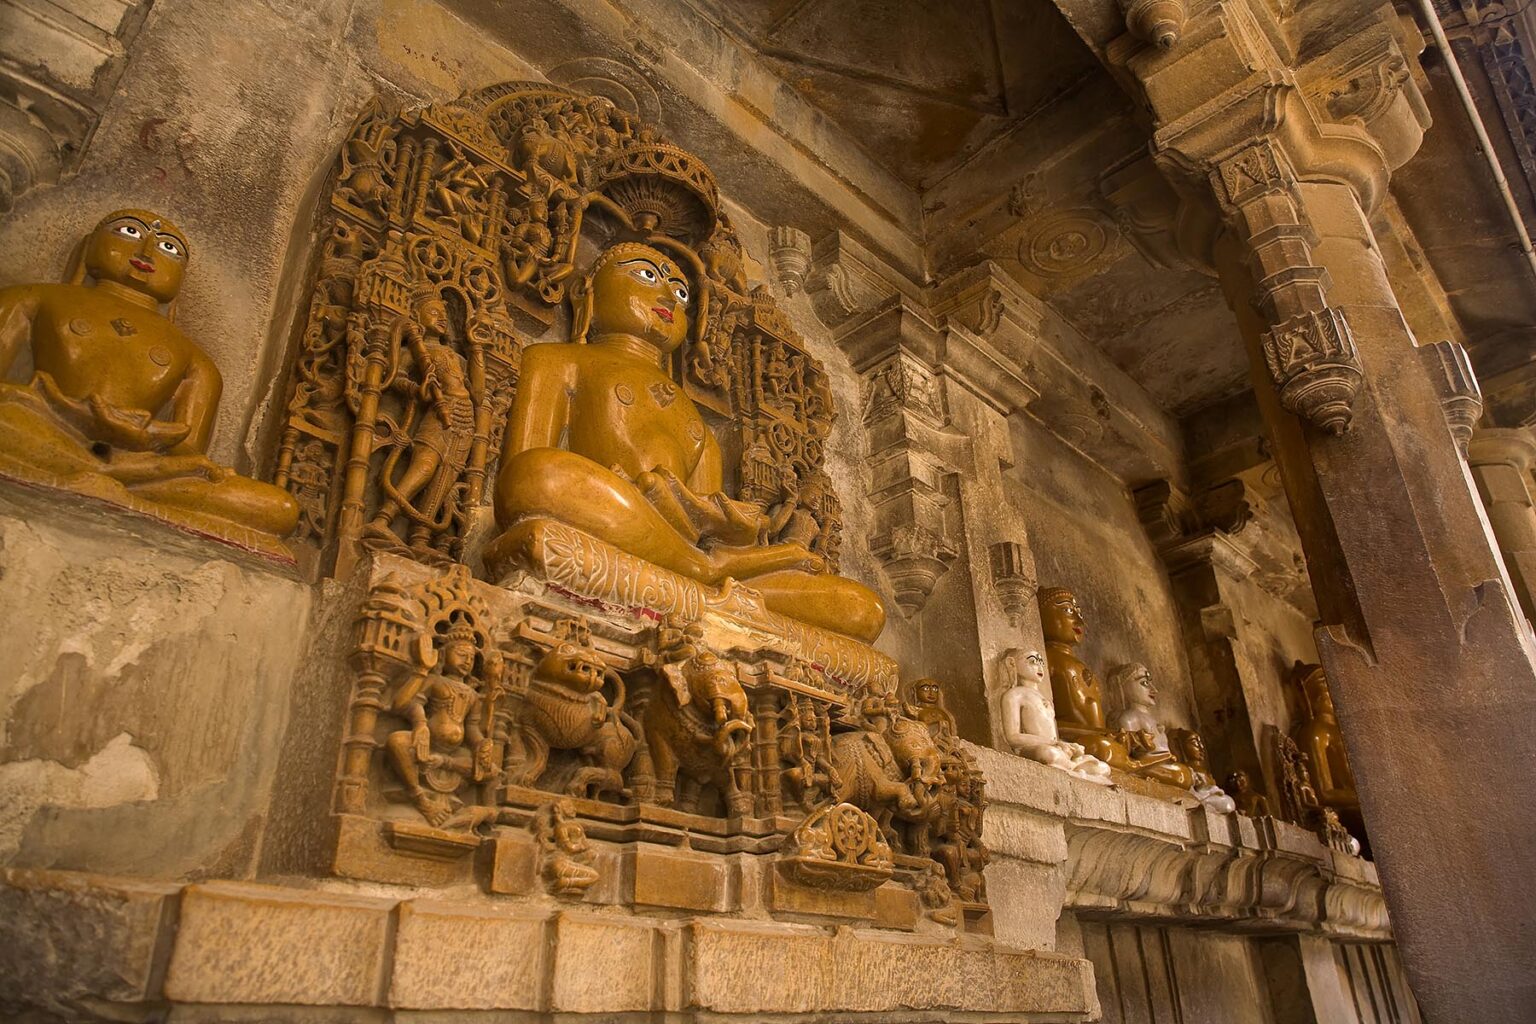 Hand carved SANDSTONE statues of MAHARIVA and other "Buddhas" in the  CHANDRAPRABHU JAIN TEMPLE inside JAISALMER FORT - RAJASTHAN, INDIA